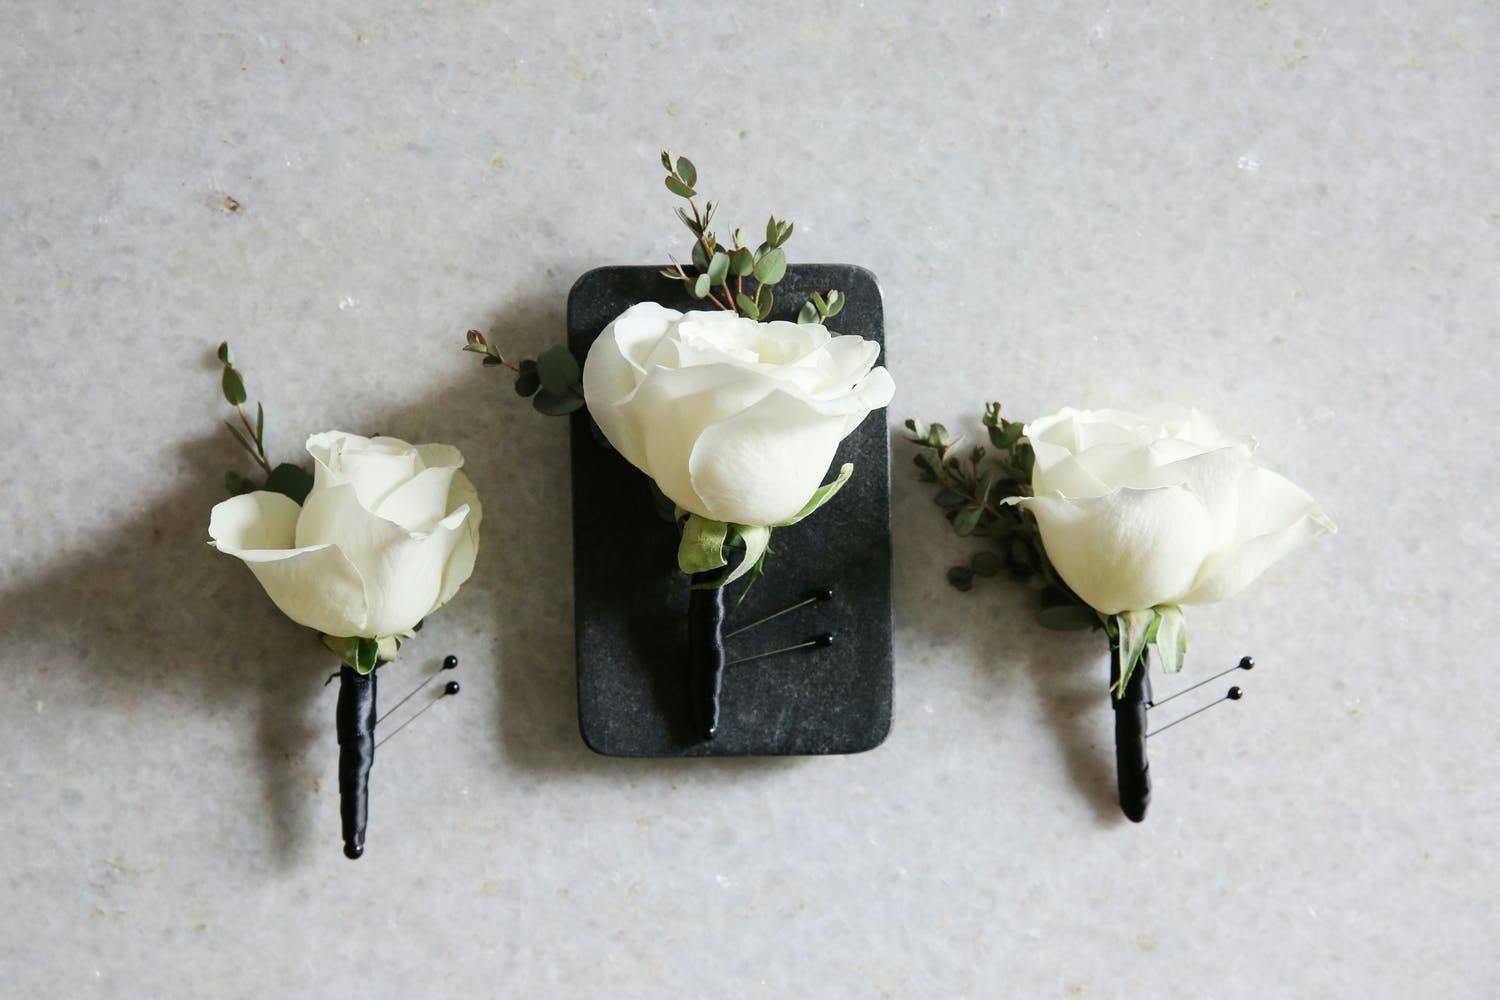 White Rose Boutonnières with Stems Wound in Black Ribbon | PartySlate